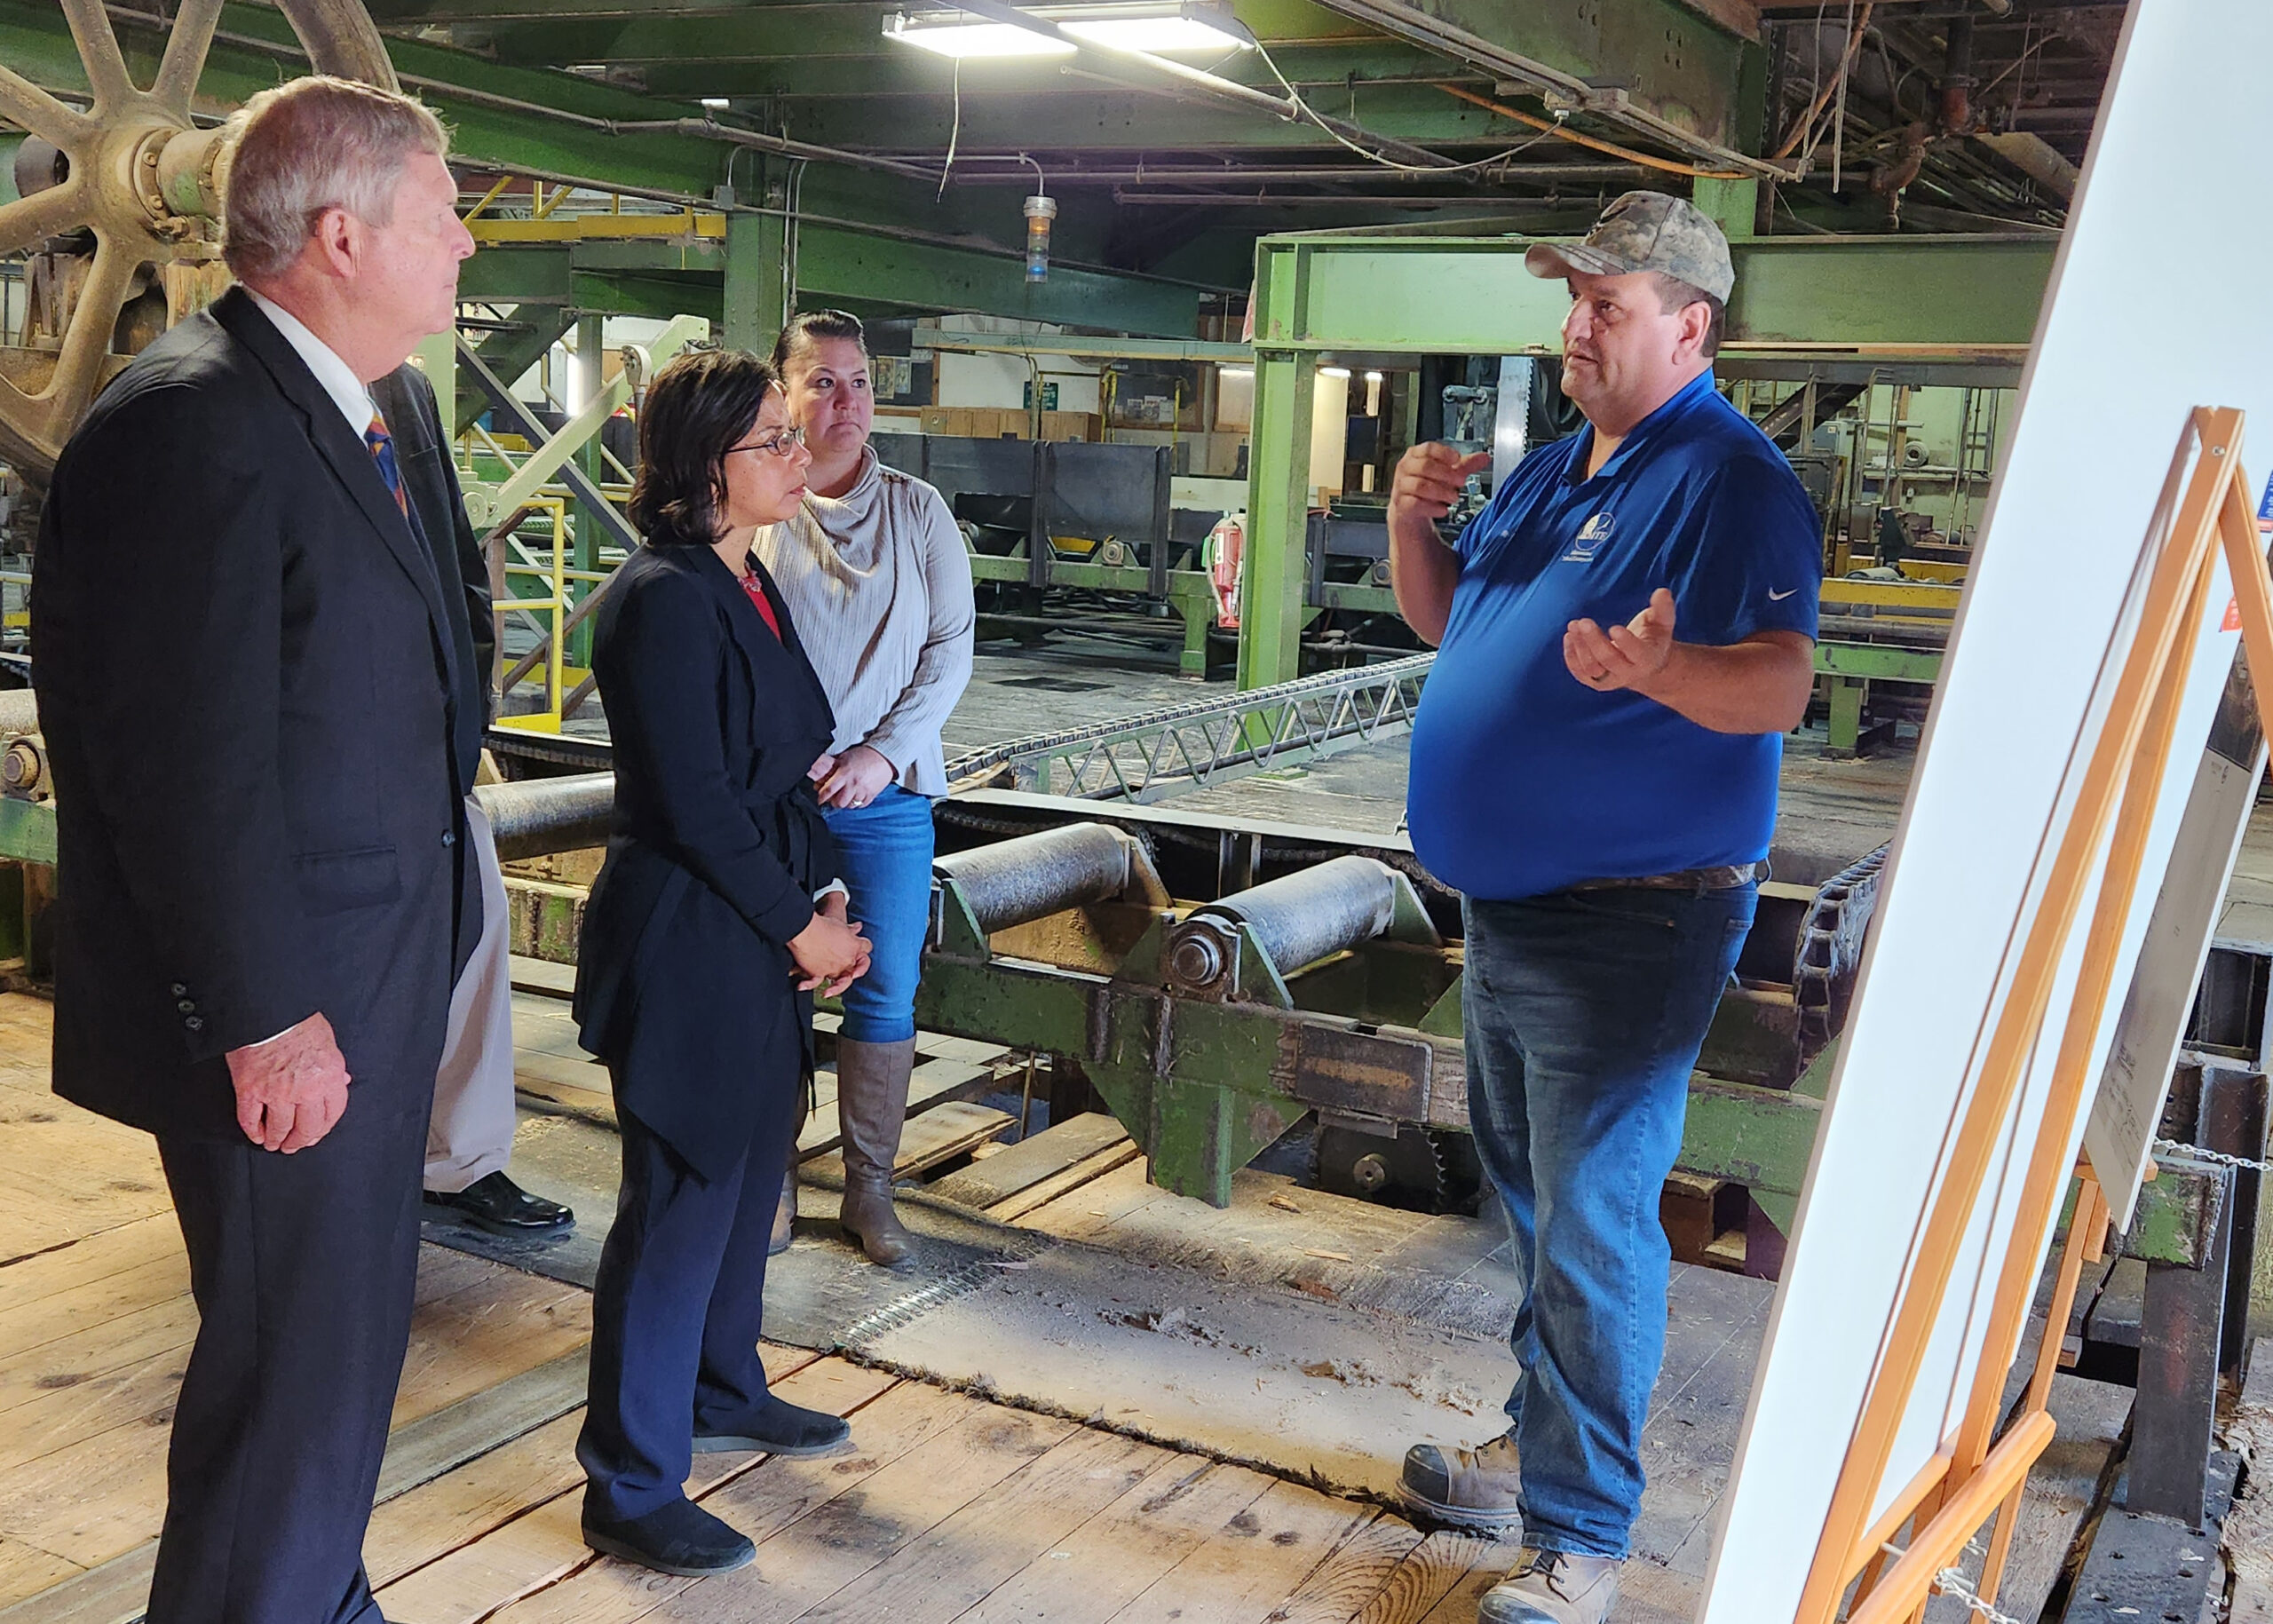 Menominee Tribal Enterprises Lumber Operations Manager John Awonohopay gives U.S. Department of Agriculture Secretary Tom Vilsack and White House Domestic Policy Advisor Susan Rice a tour of the sawmill.